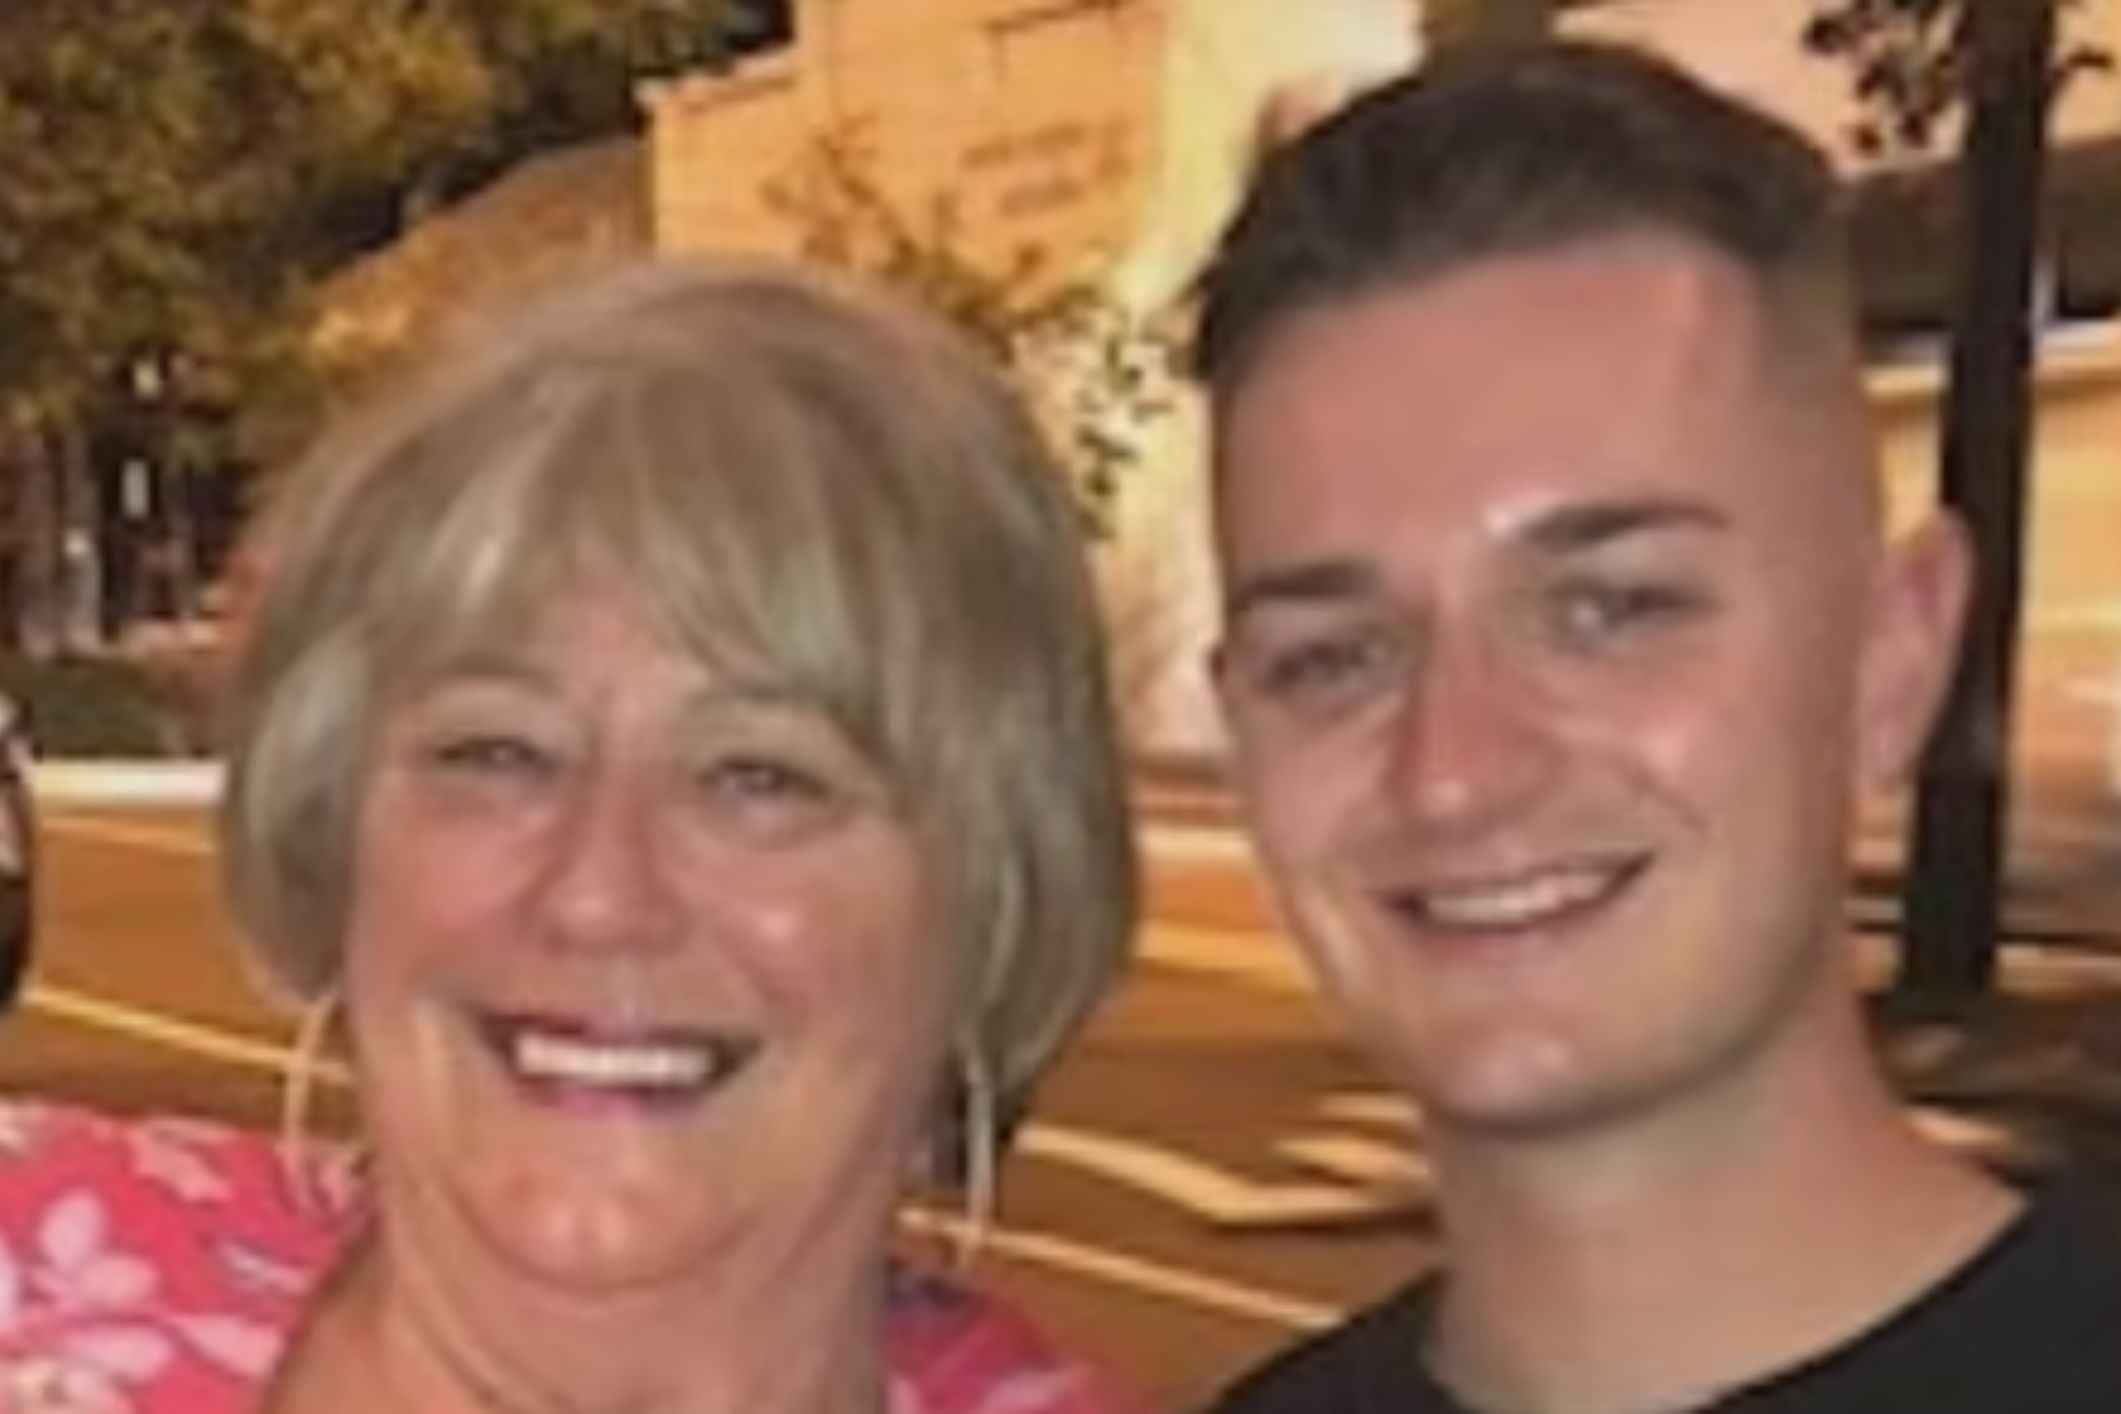 Grandson allegedly embezzled 320K from his grandmother to fund lavish lifestyle